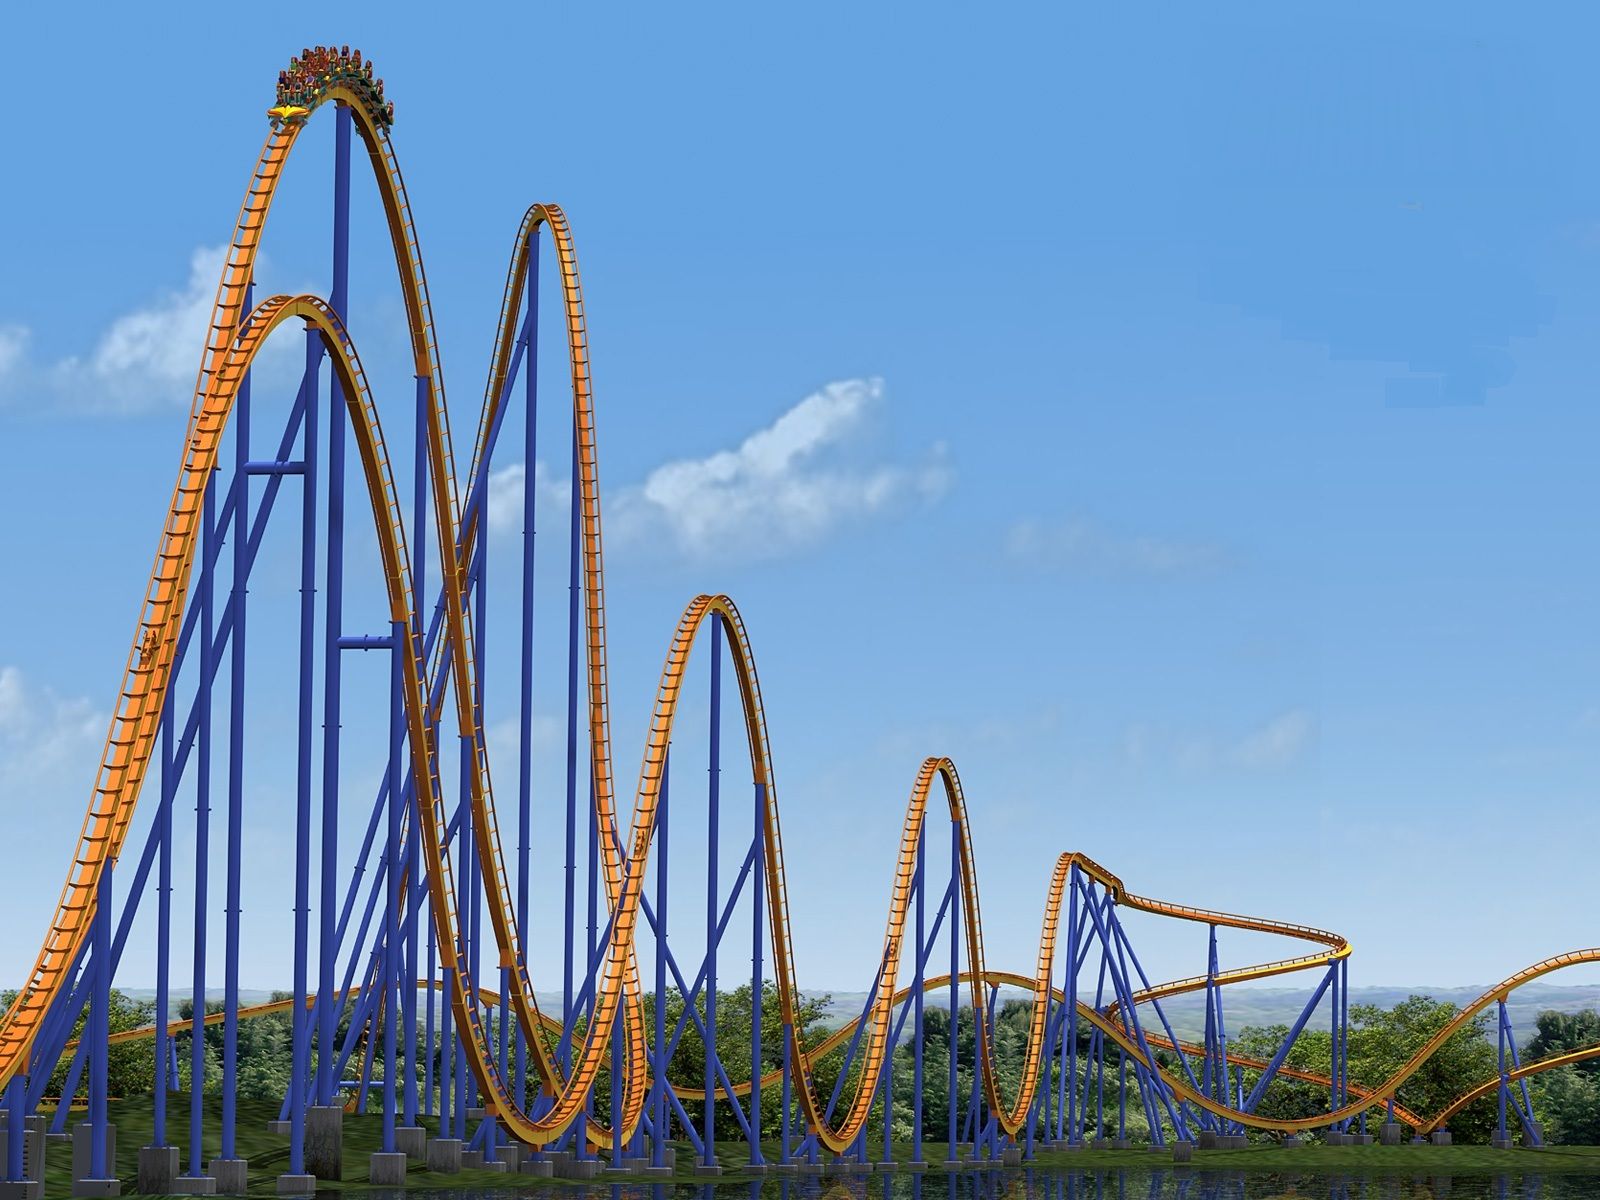 The Tallest Roller Coaster In The World 2022